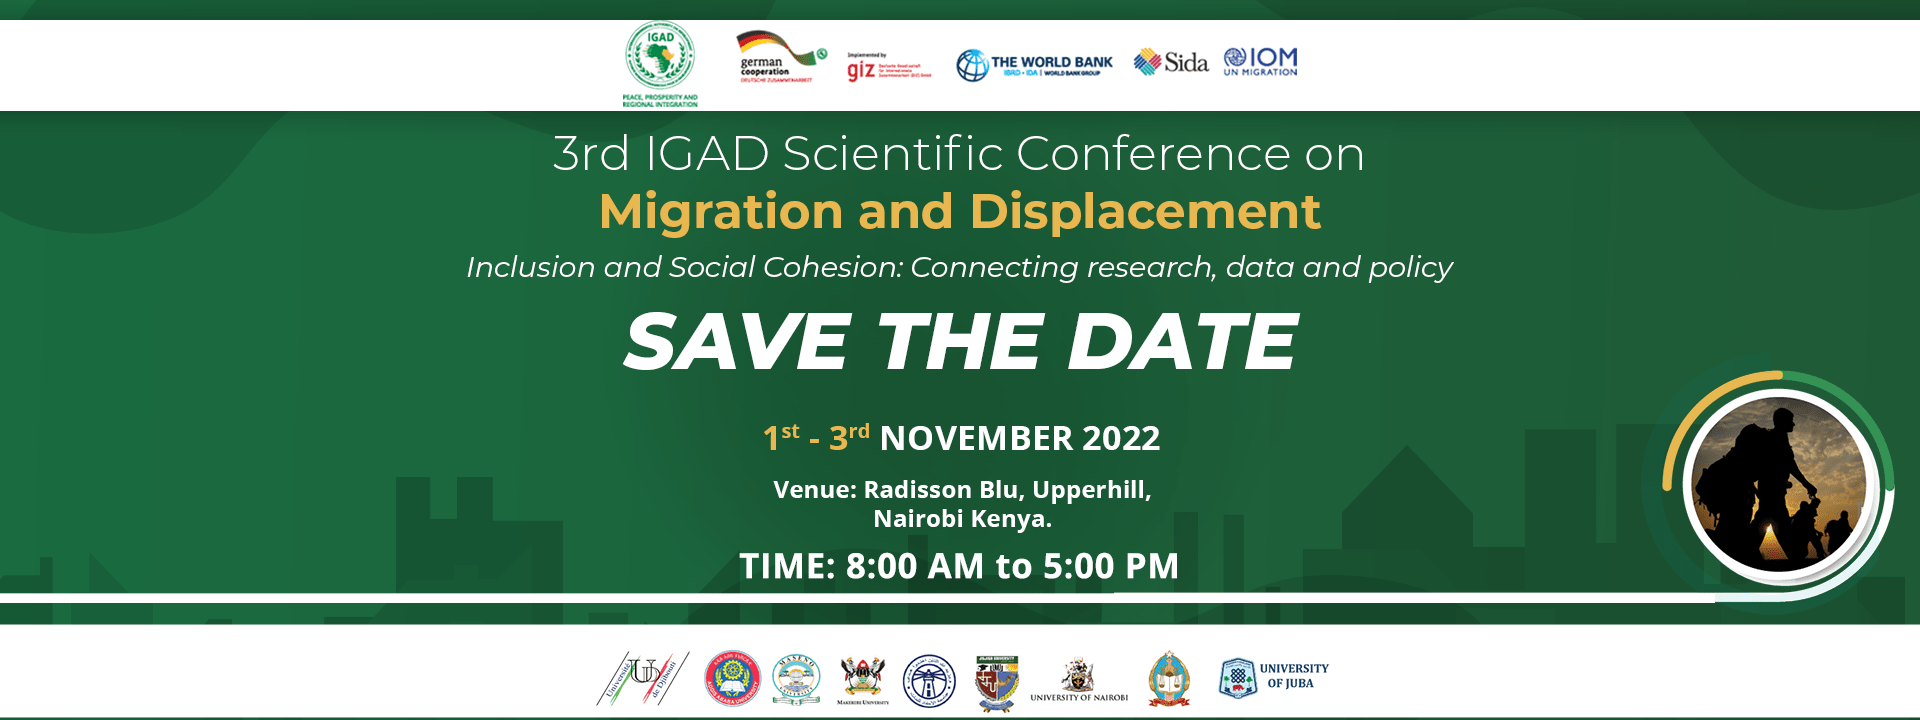 3rd IGAD Scientific Conference on Migration and Displacement